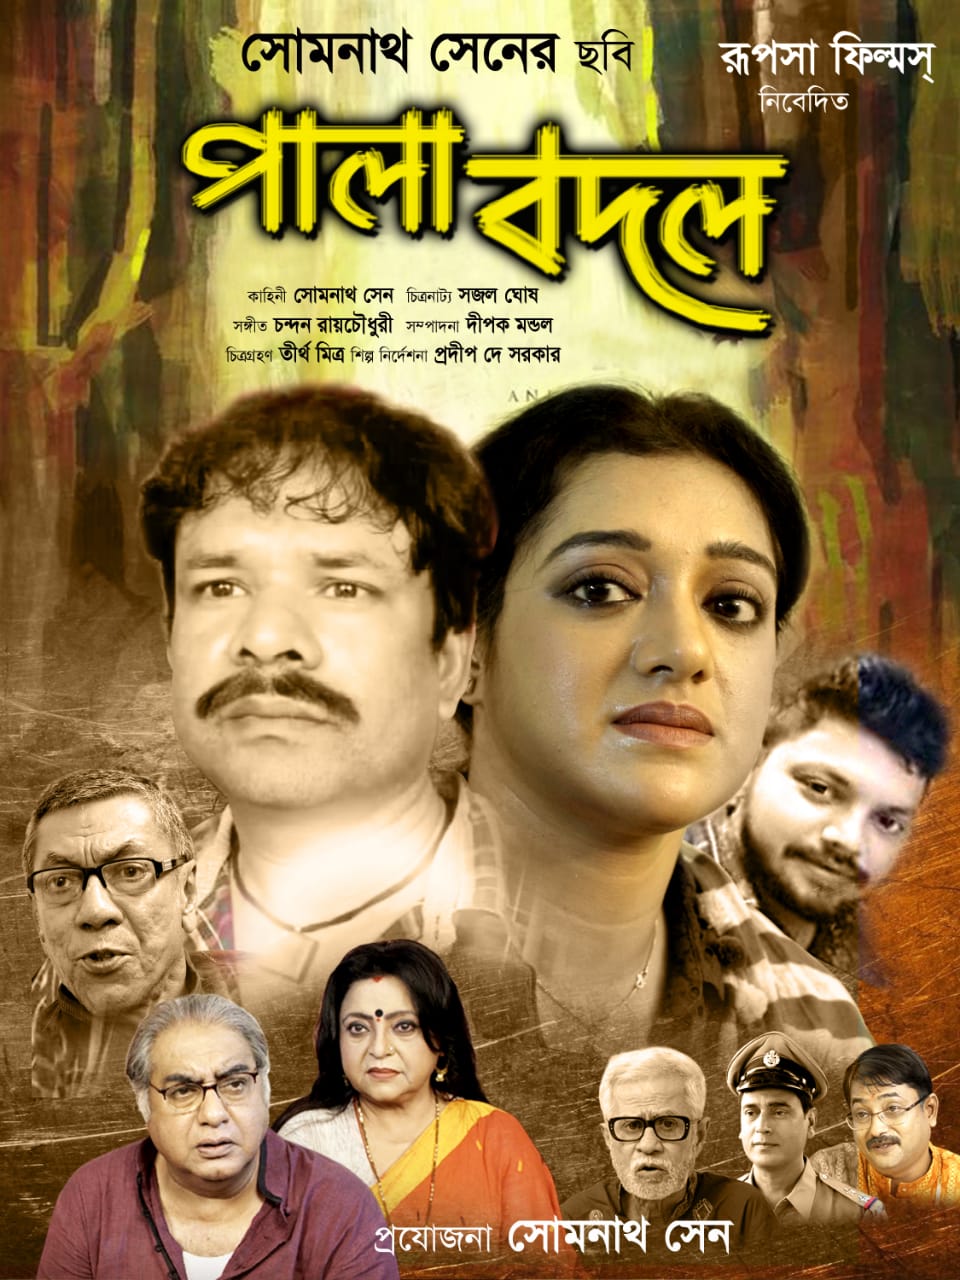 Bengali Film Pala Bodol To Release On 28th July